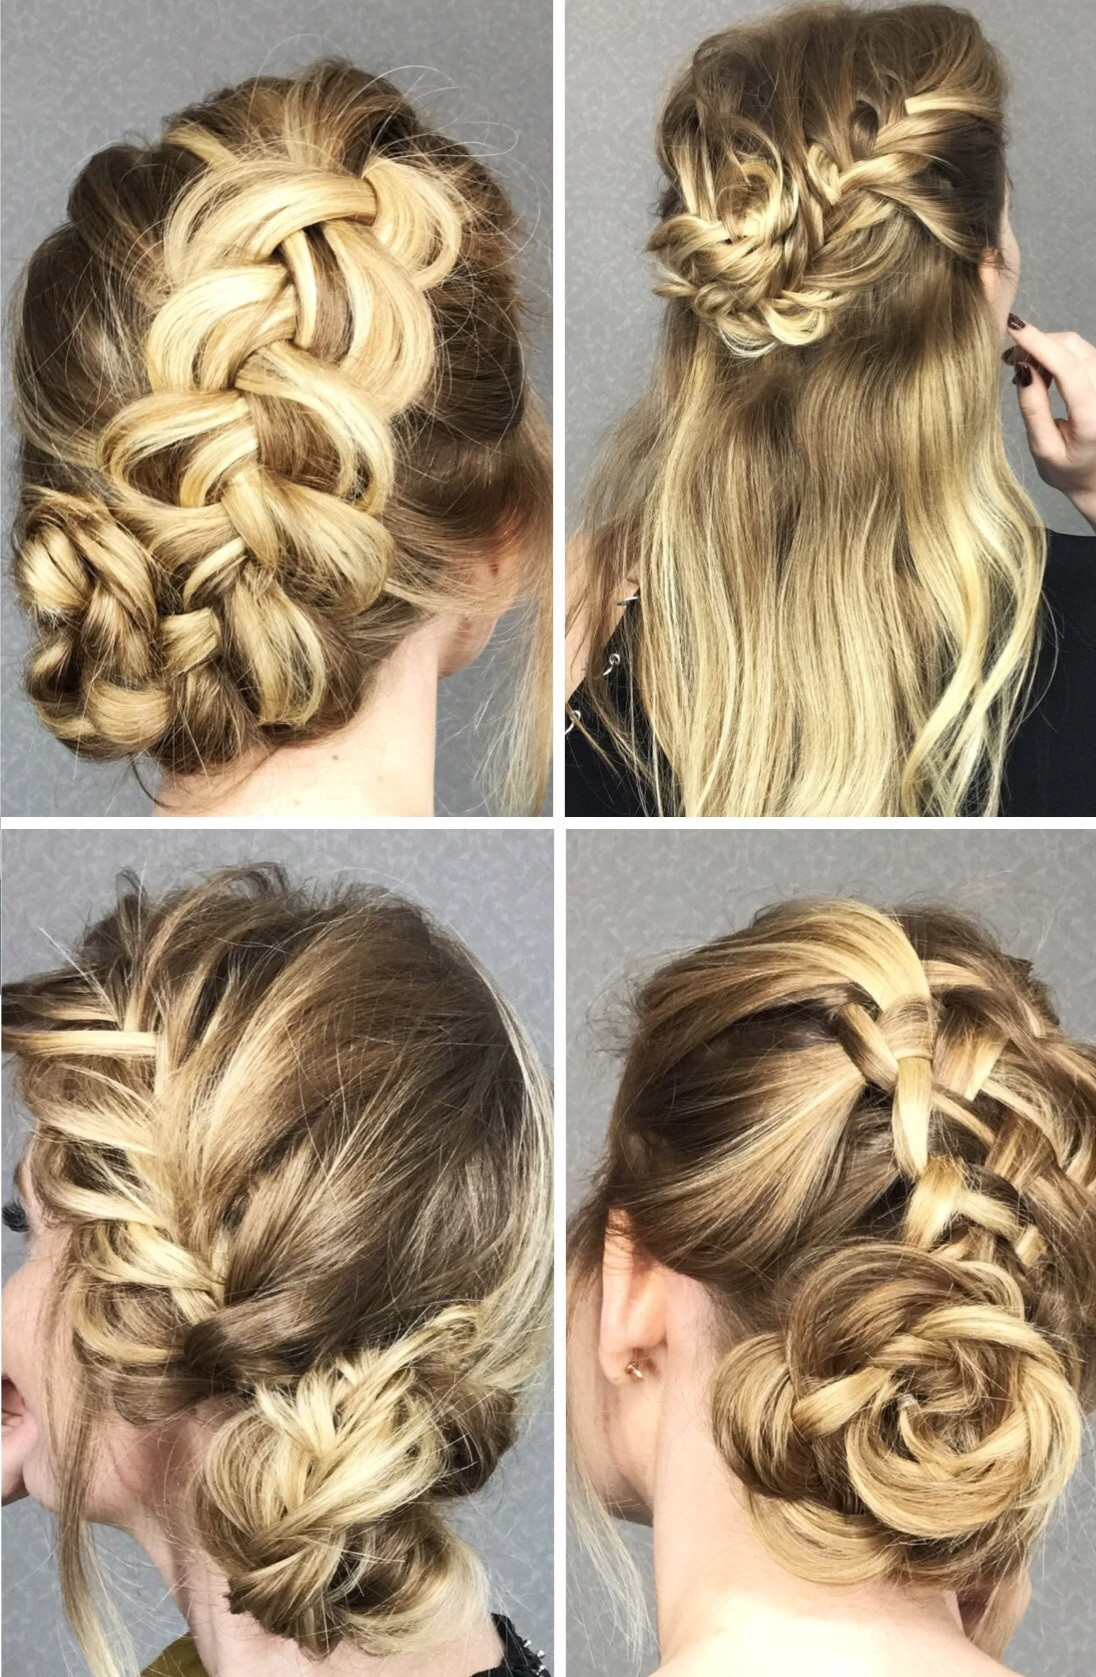 Cute And Easy Step By Step Hairstyles
 4 Cute Braided Hairstyles in Easy Step by Step Tutorials